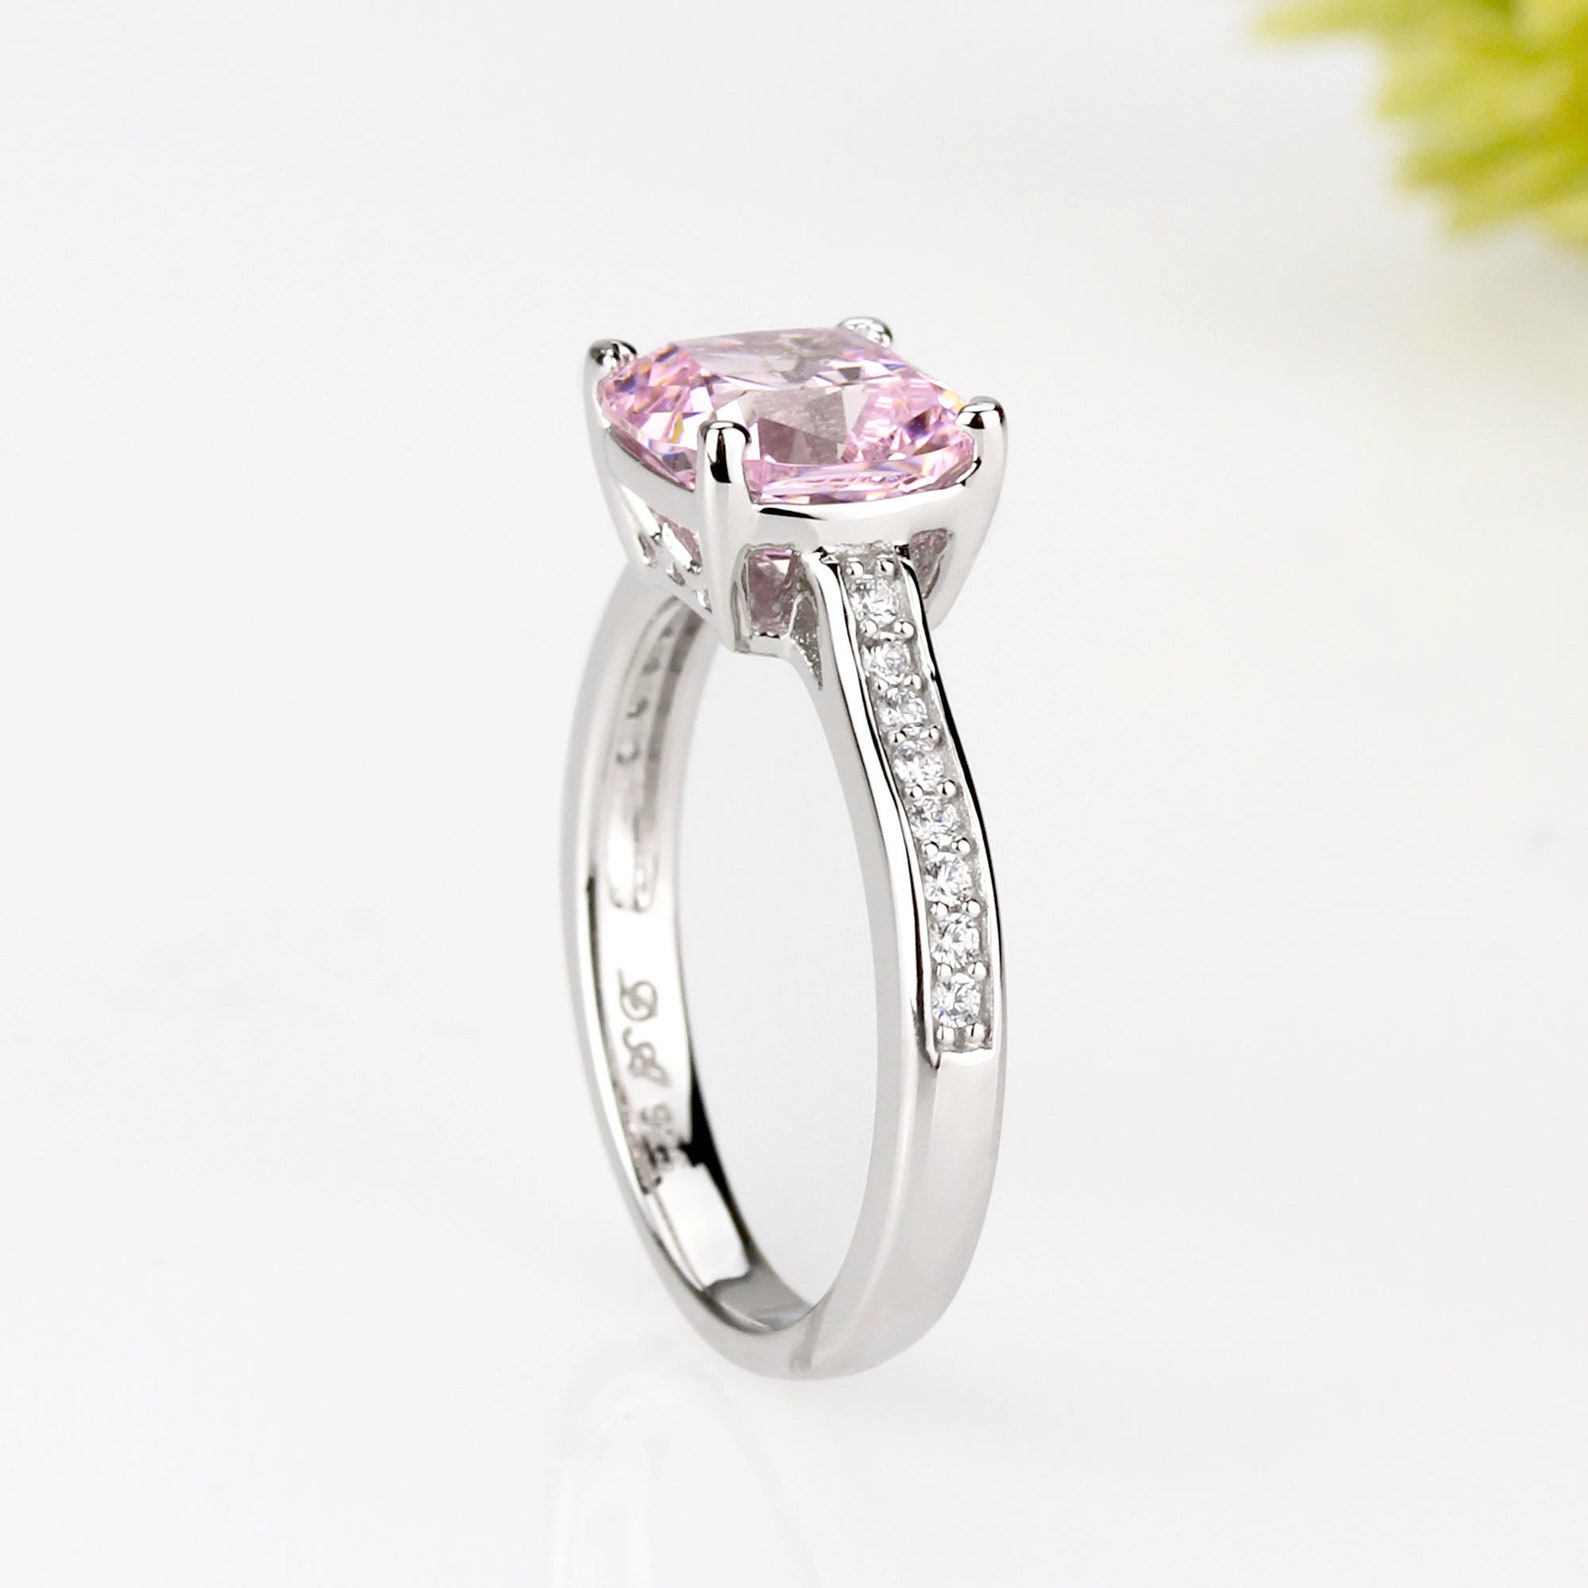 2 Carat Cushion Cut Pink Stone Ring Platinum Plated Sterling - Etsy